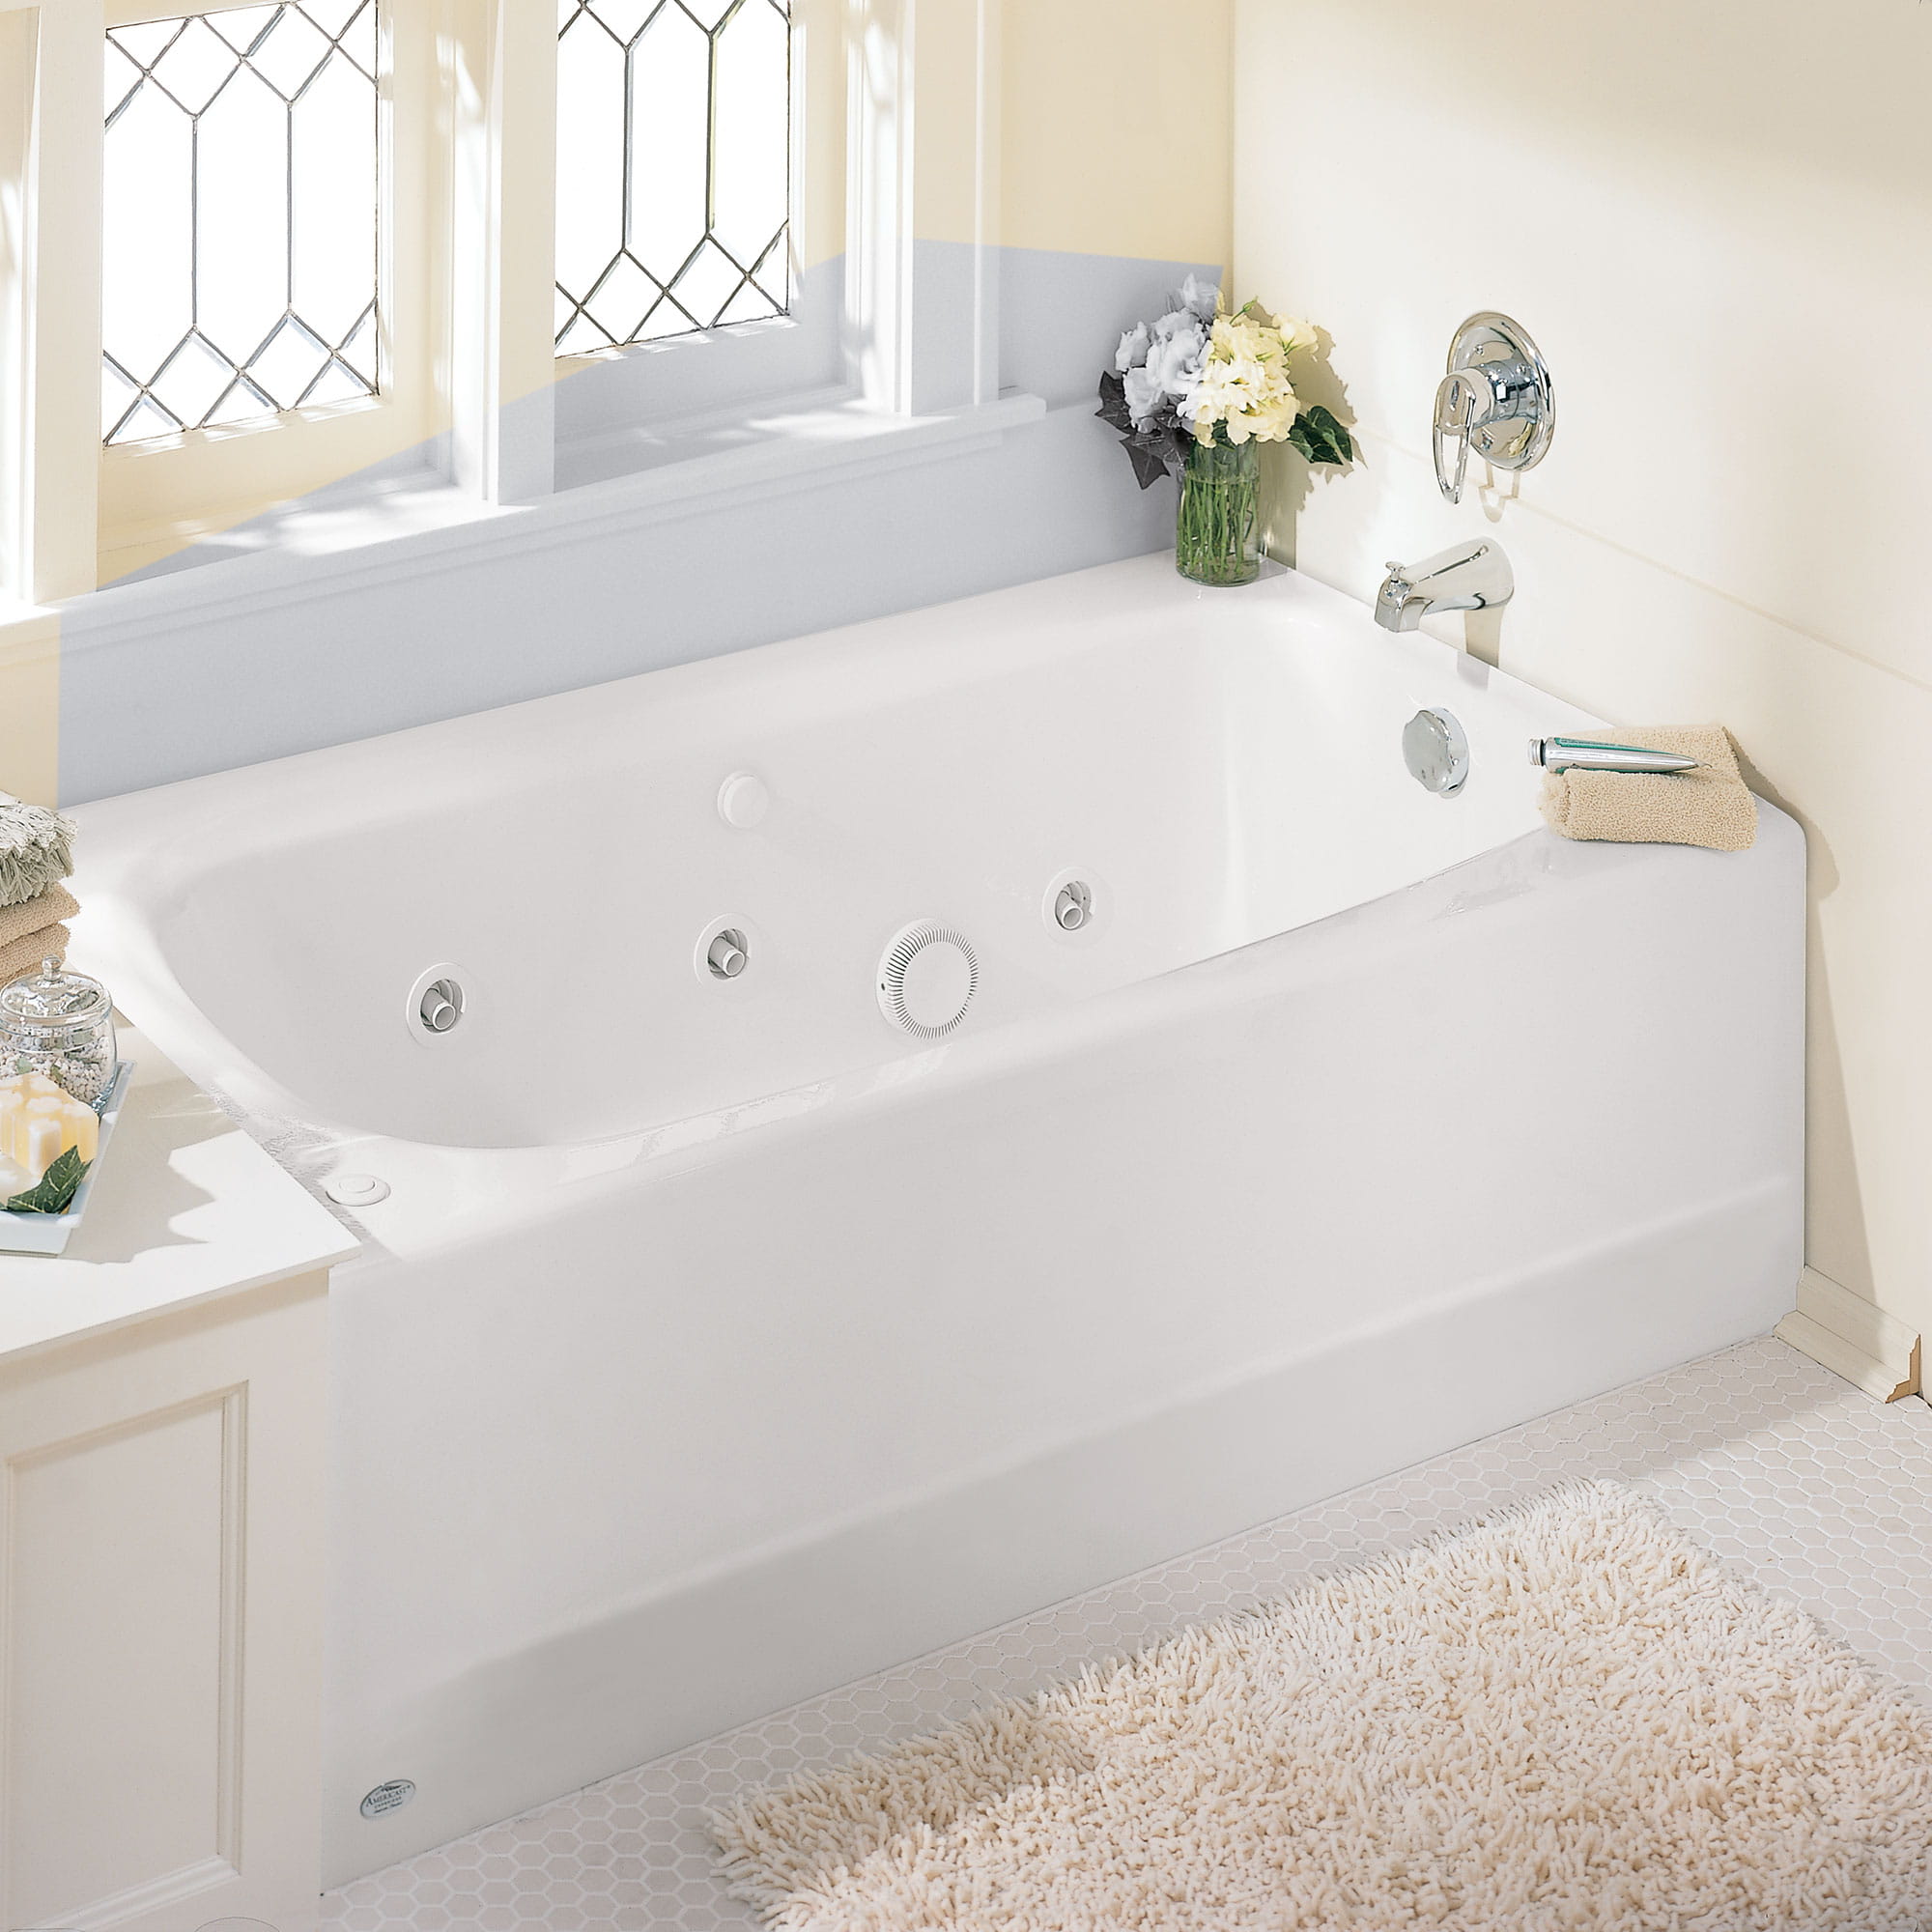 Cambridge Americast 60 x 32 Inch Integral Apron Bathtub  Right Hand Outlet With EverClean Hydromassage System WHITE